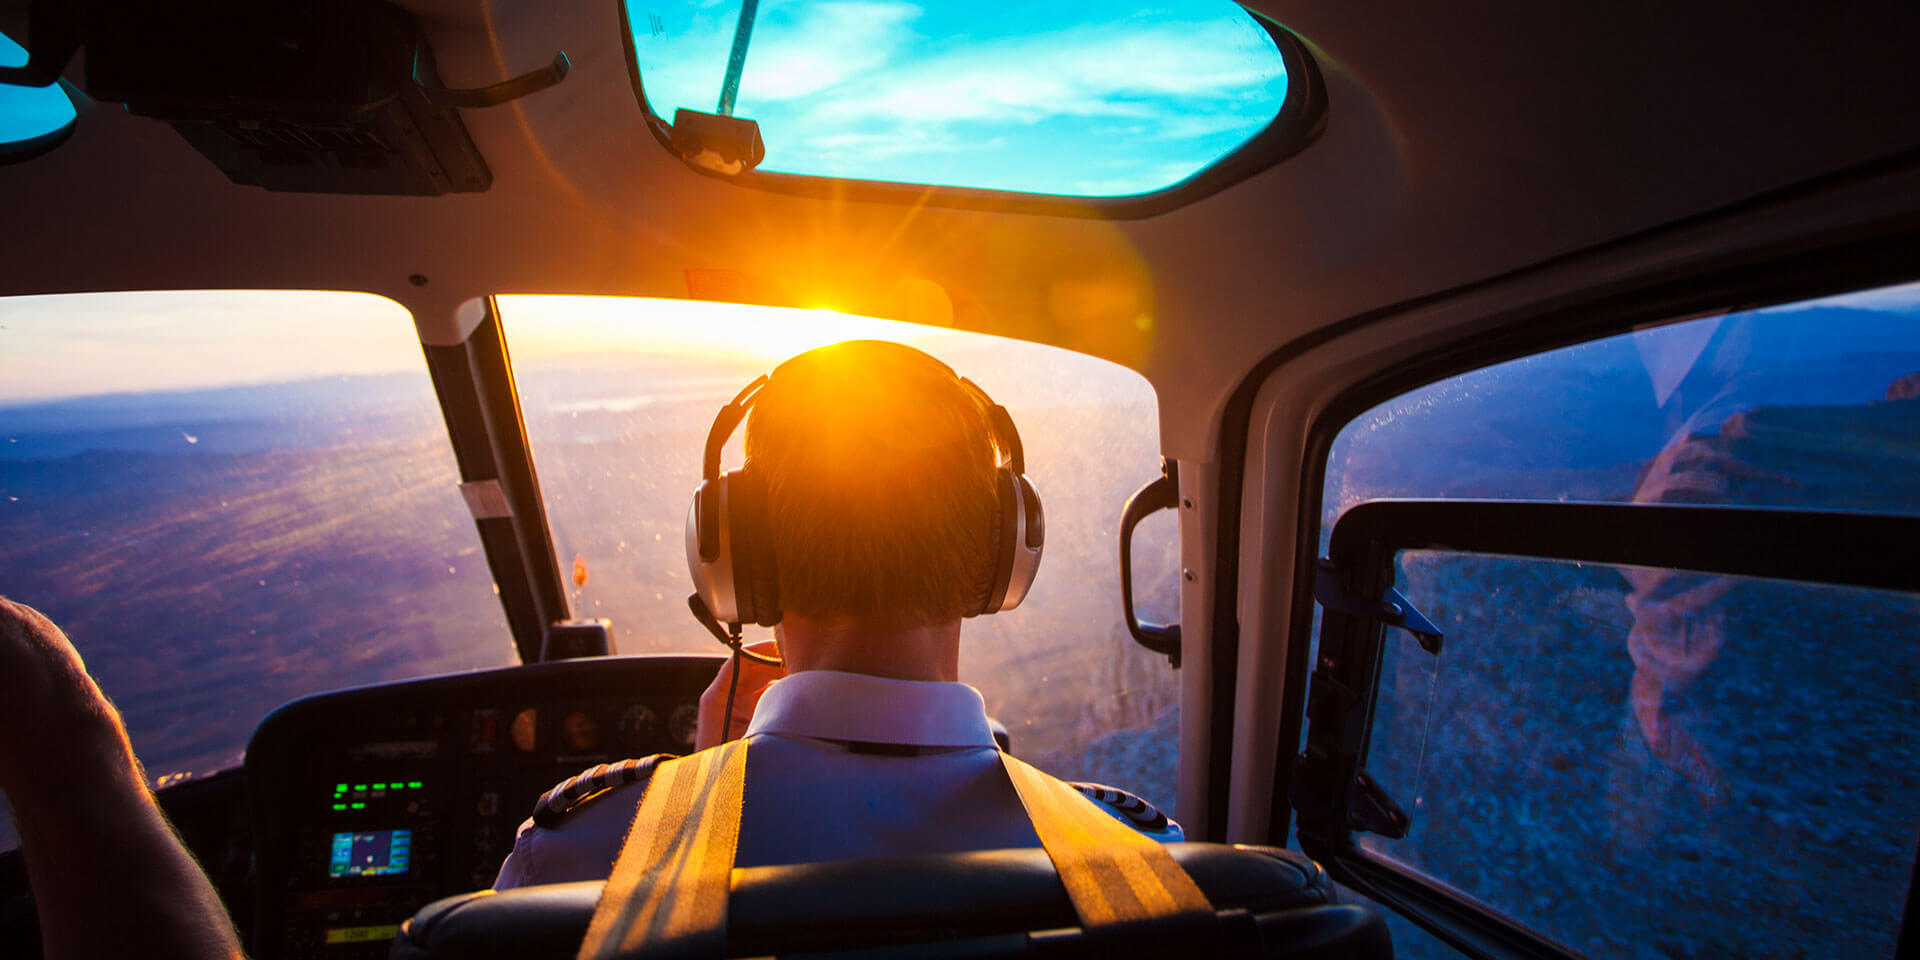 pilot flying a plane looking at the view with a sunset